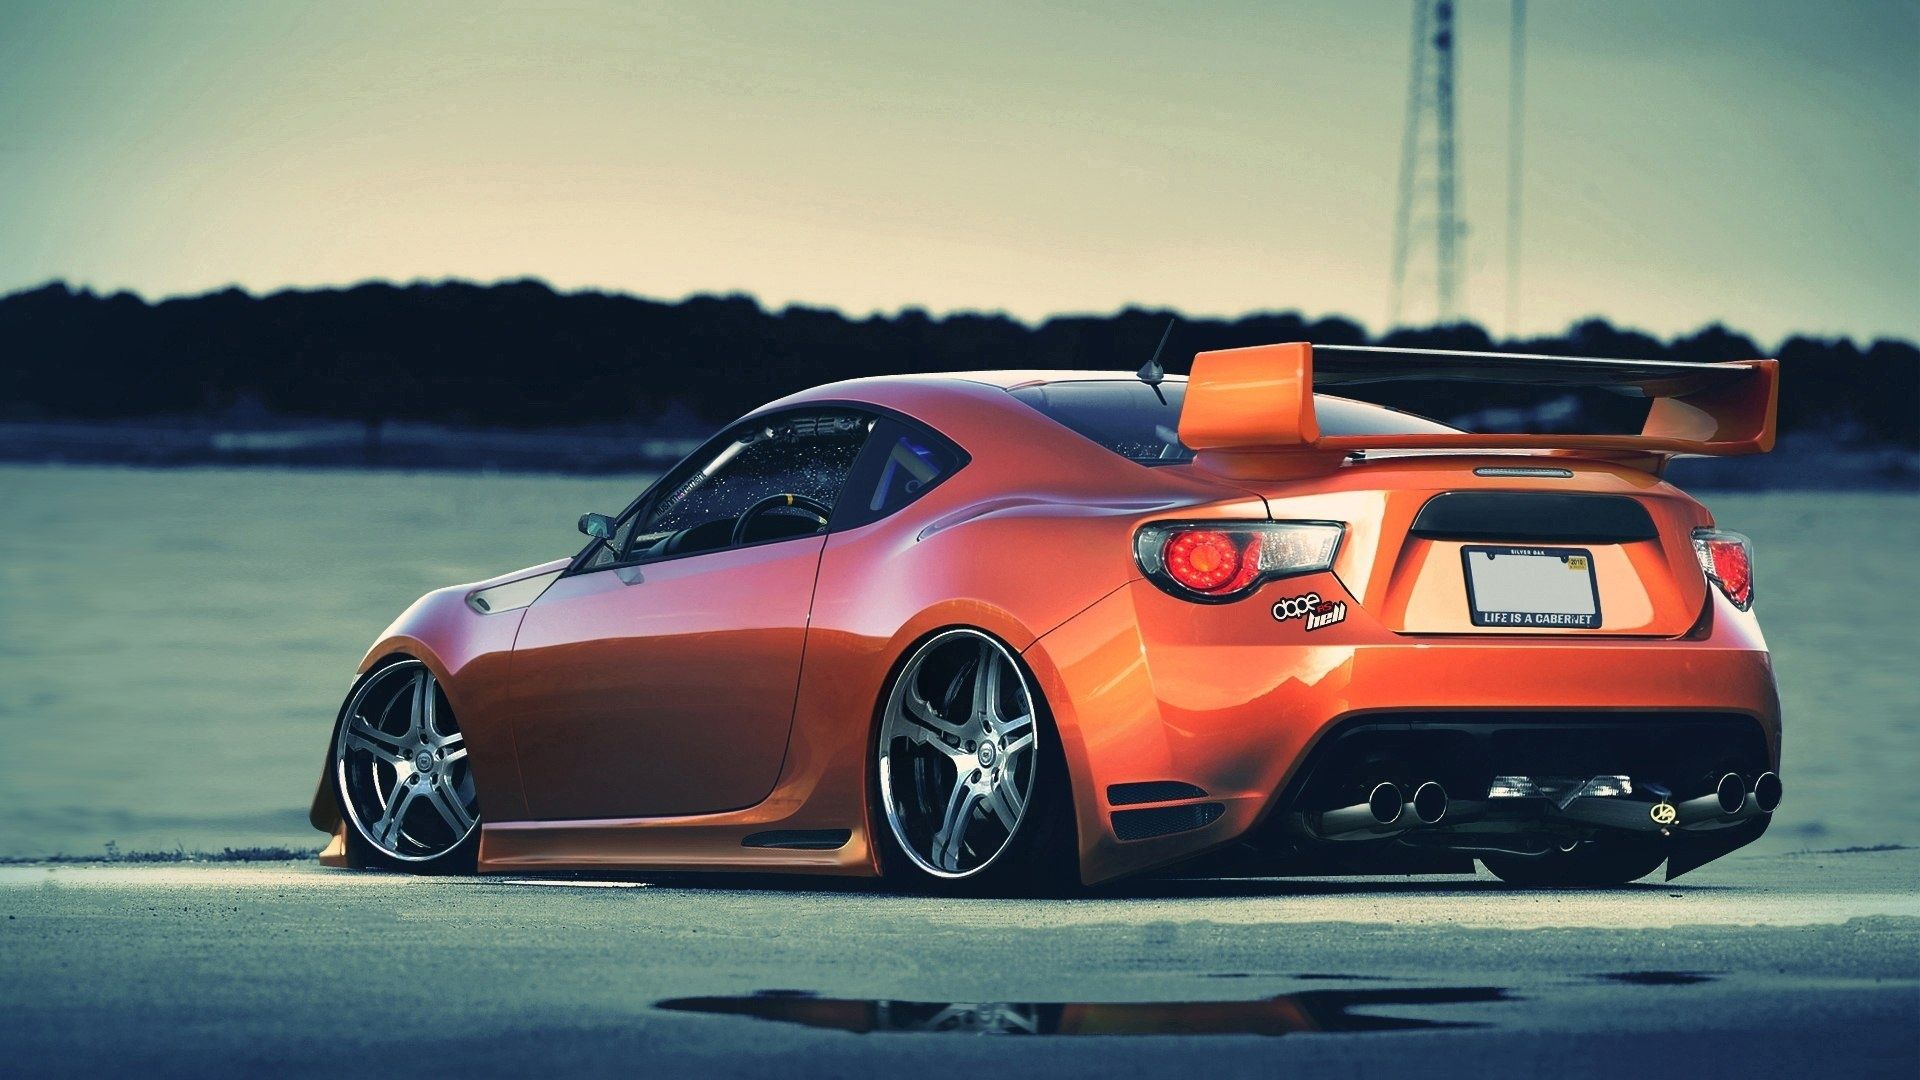 Wallpapers Hd 1920x1080 Tuning Cars